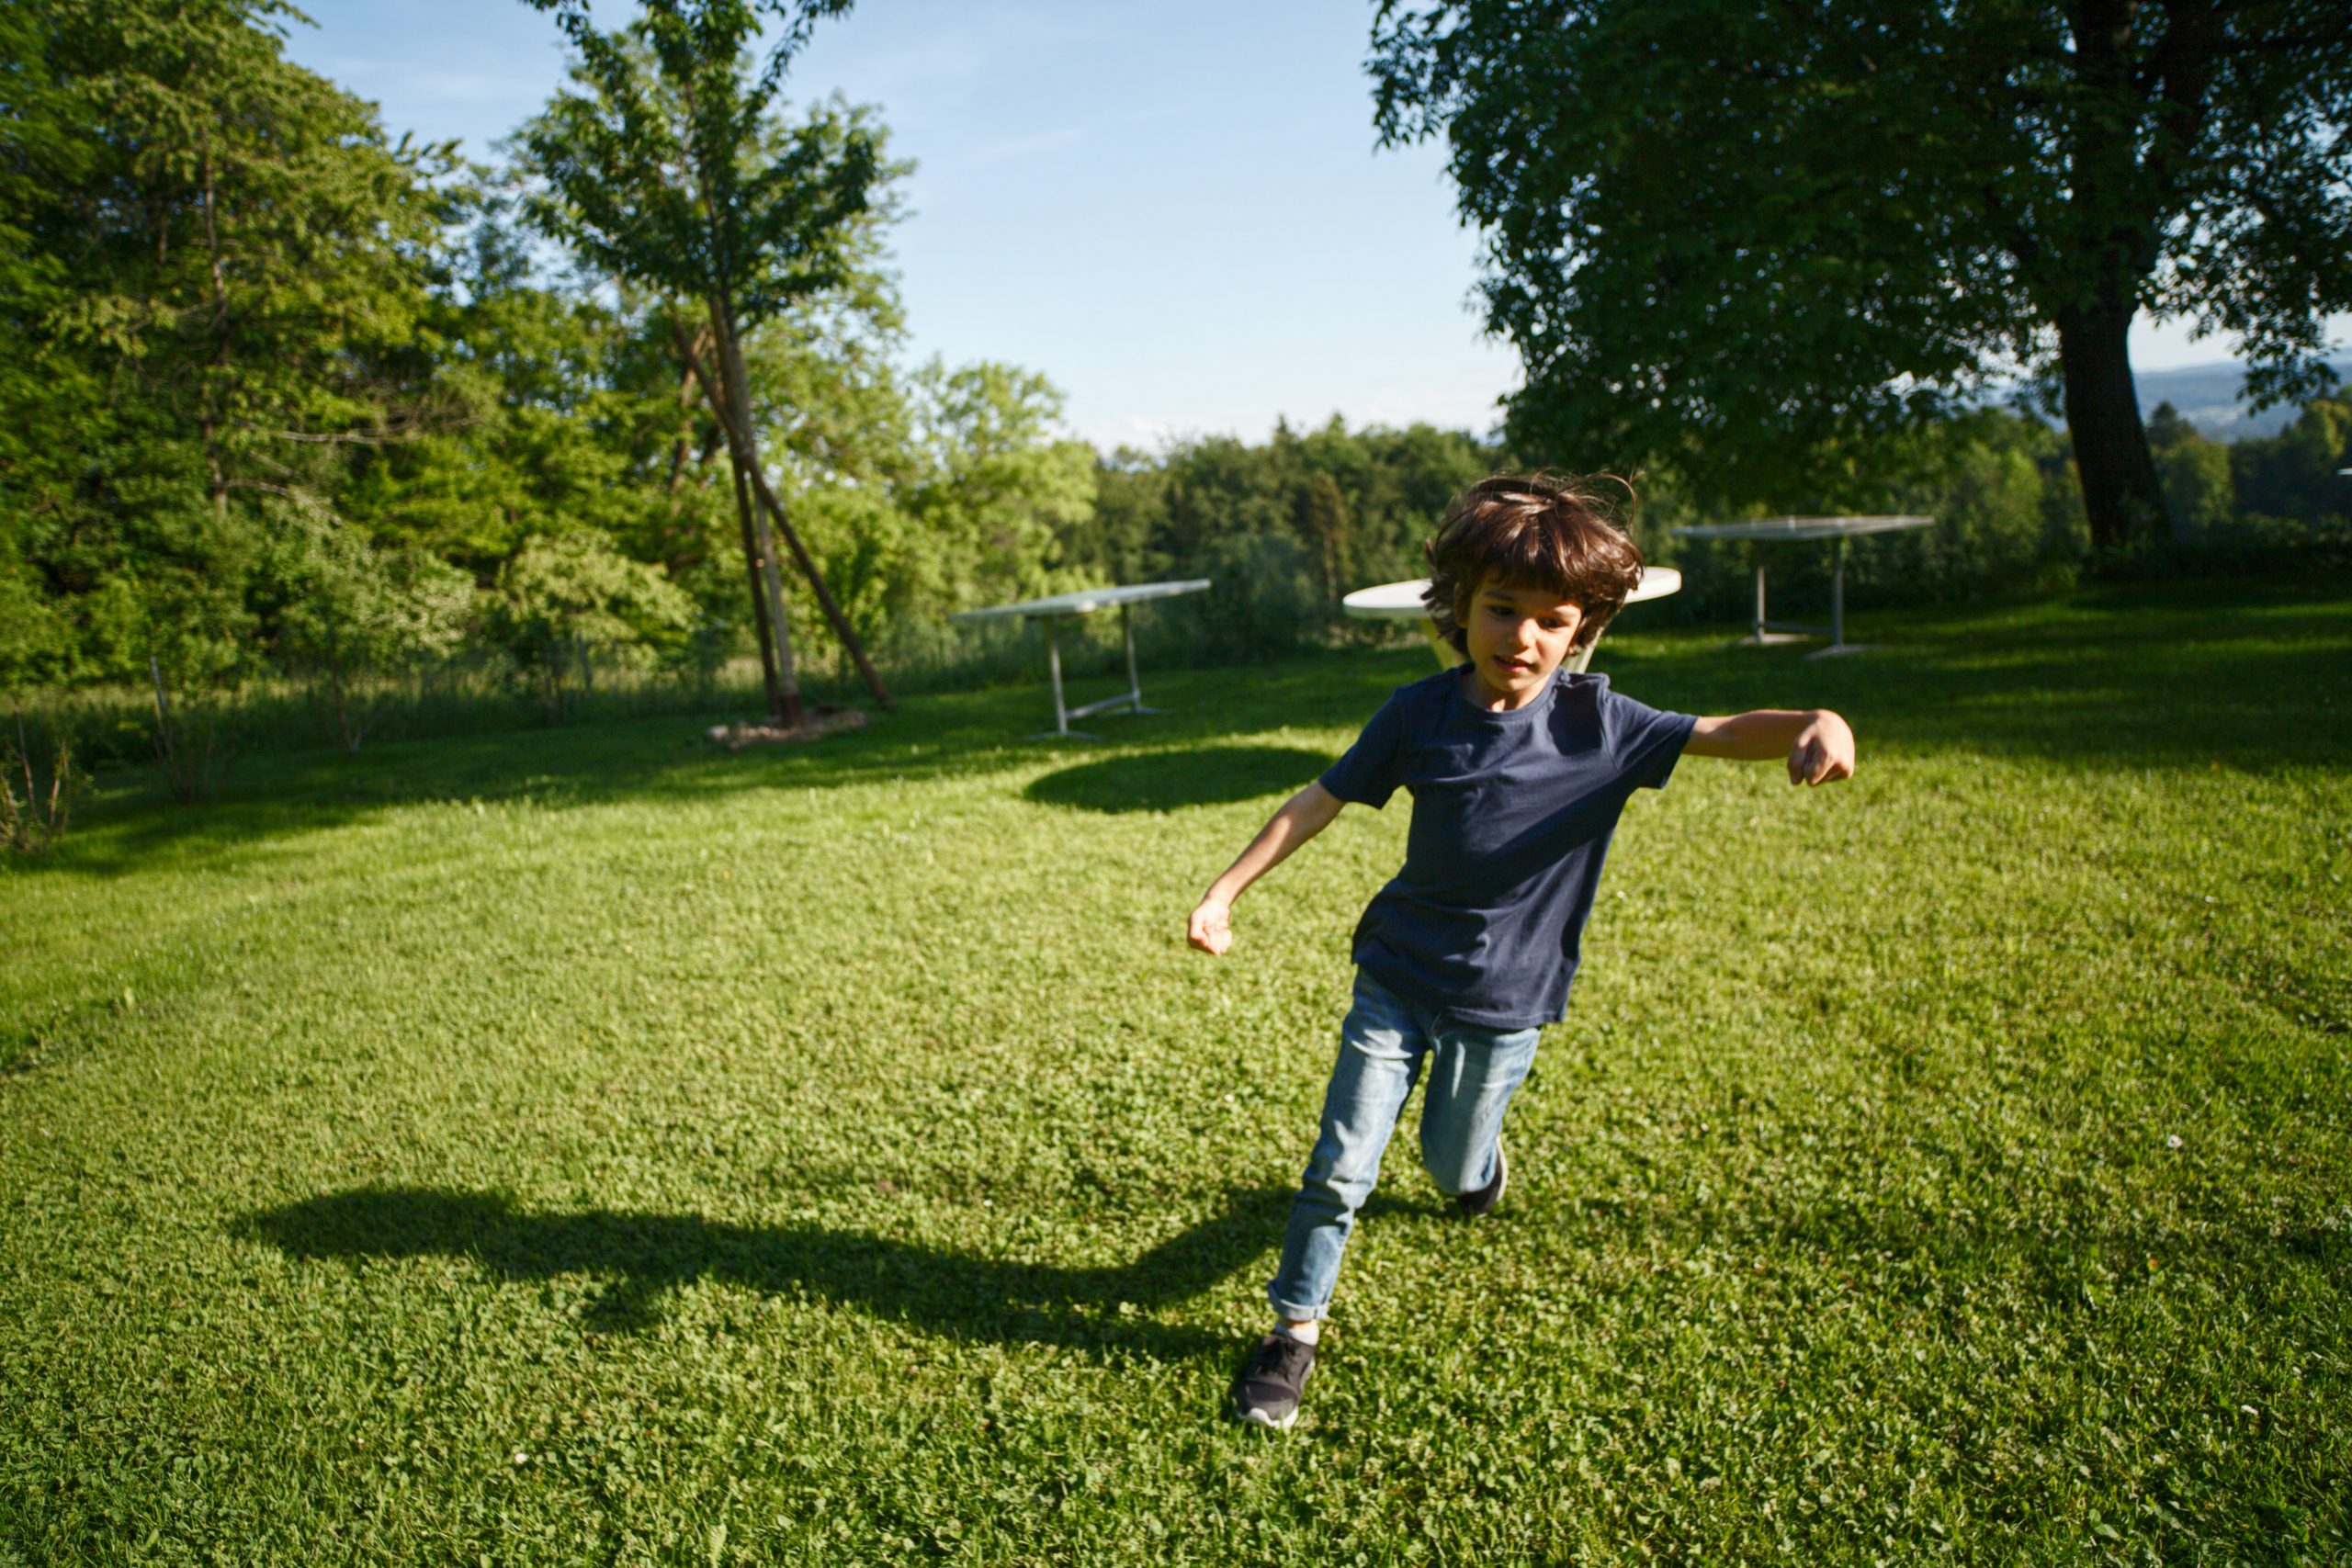 Everyone needs a safe place to play in nature, especially our kids. Photo: Pexels